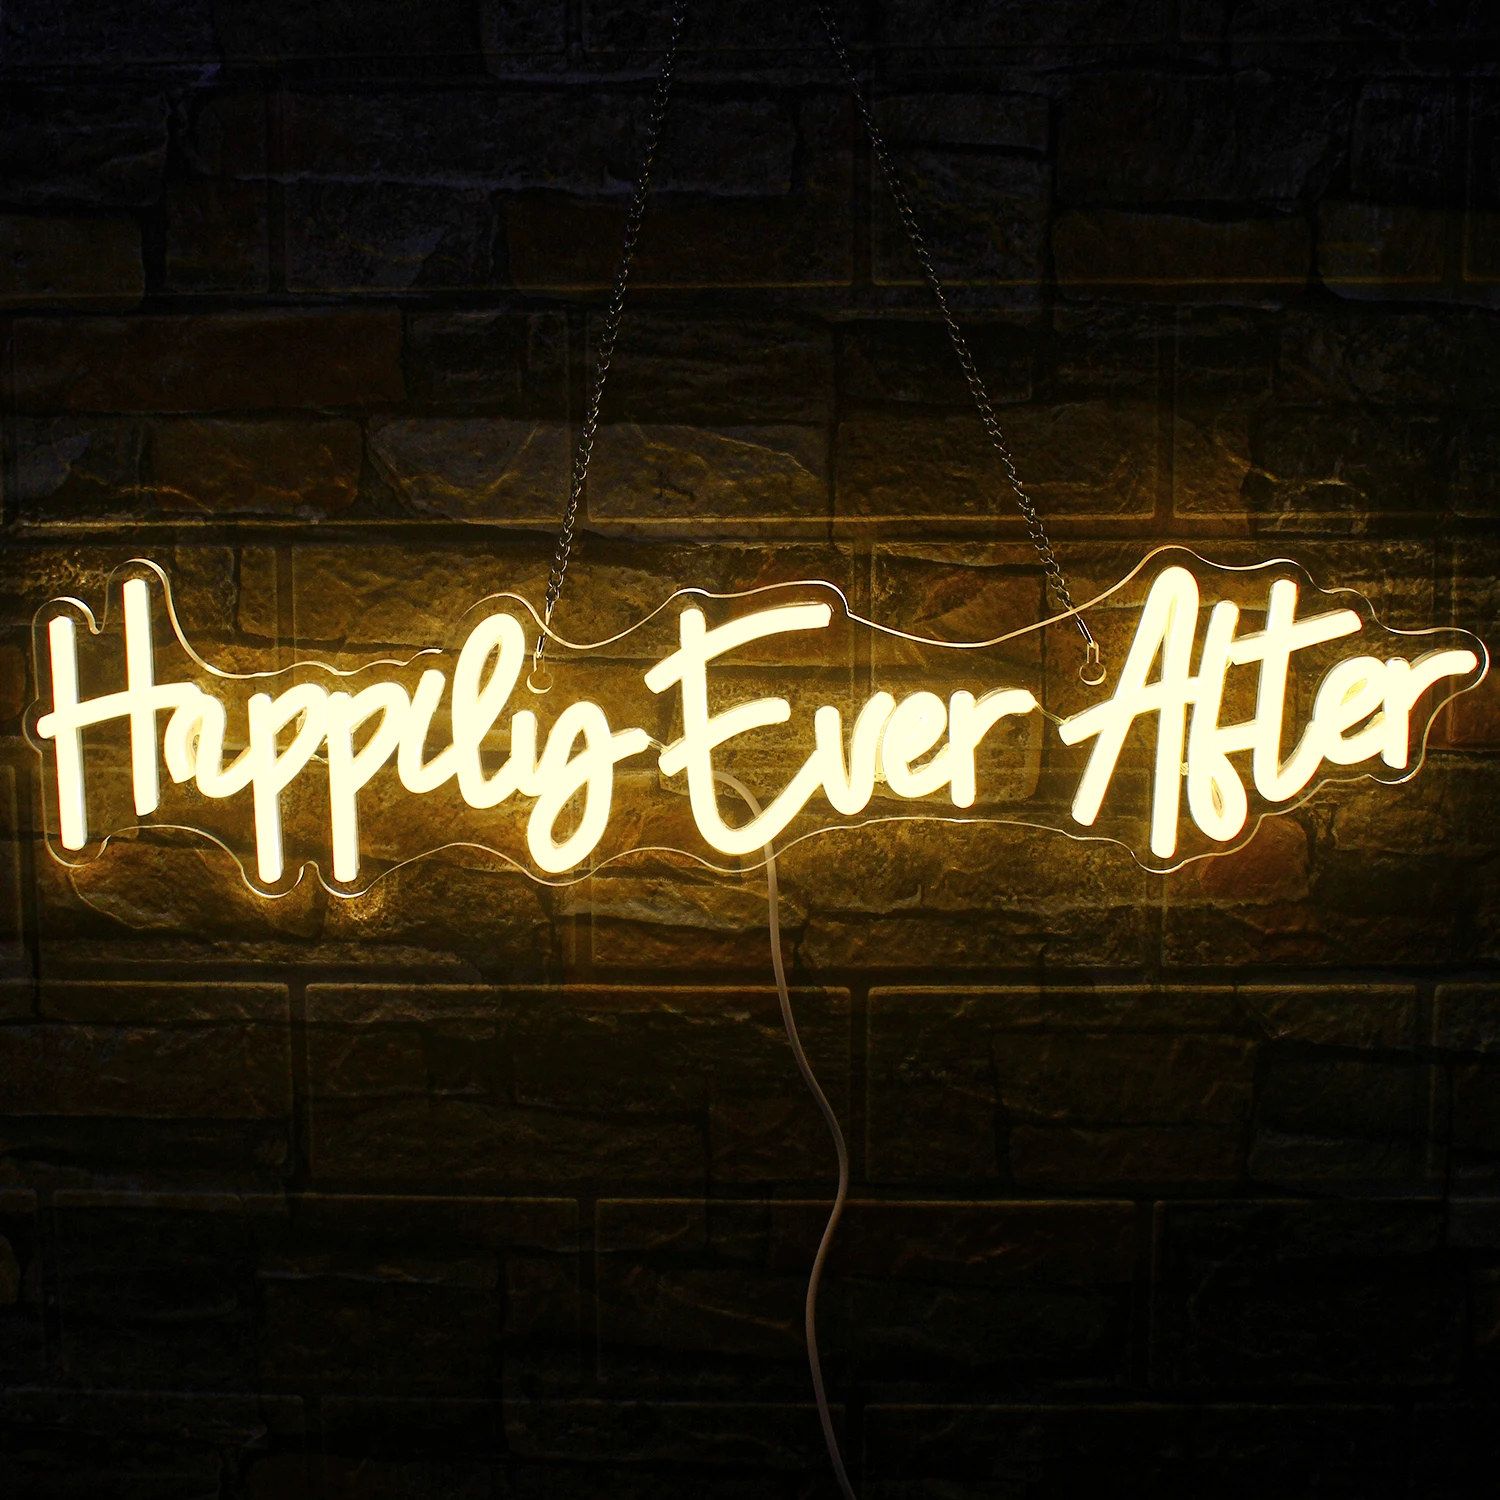 

Happily Ever After Neon Sign LED Warm White Room Wall Decor USB Powered Lights for Wedding Engagement Party Bar Bedroom Decor